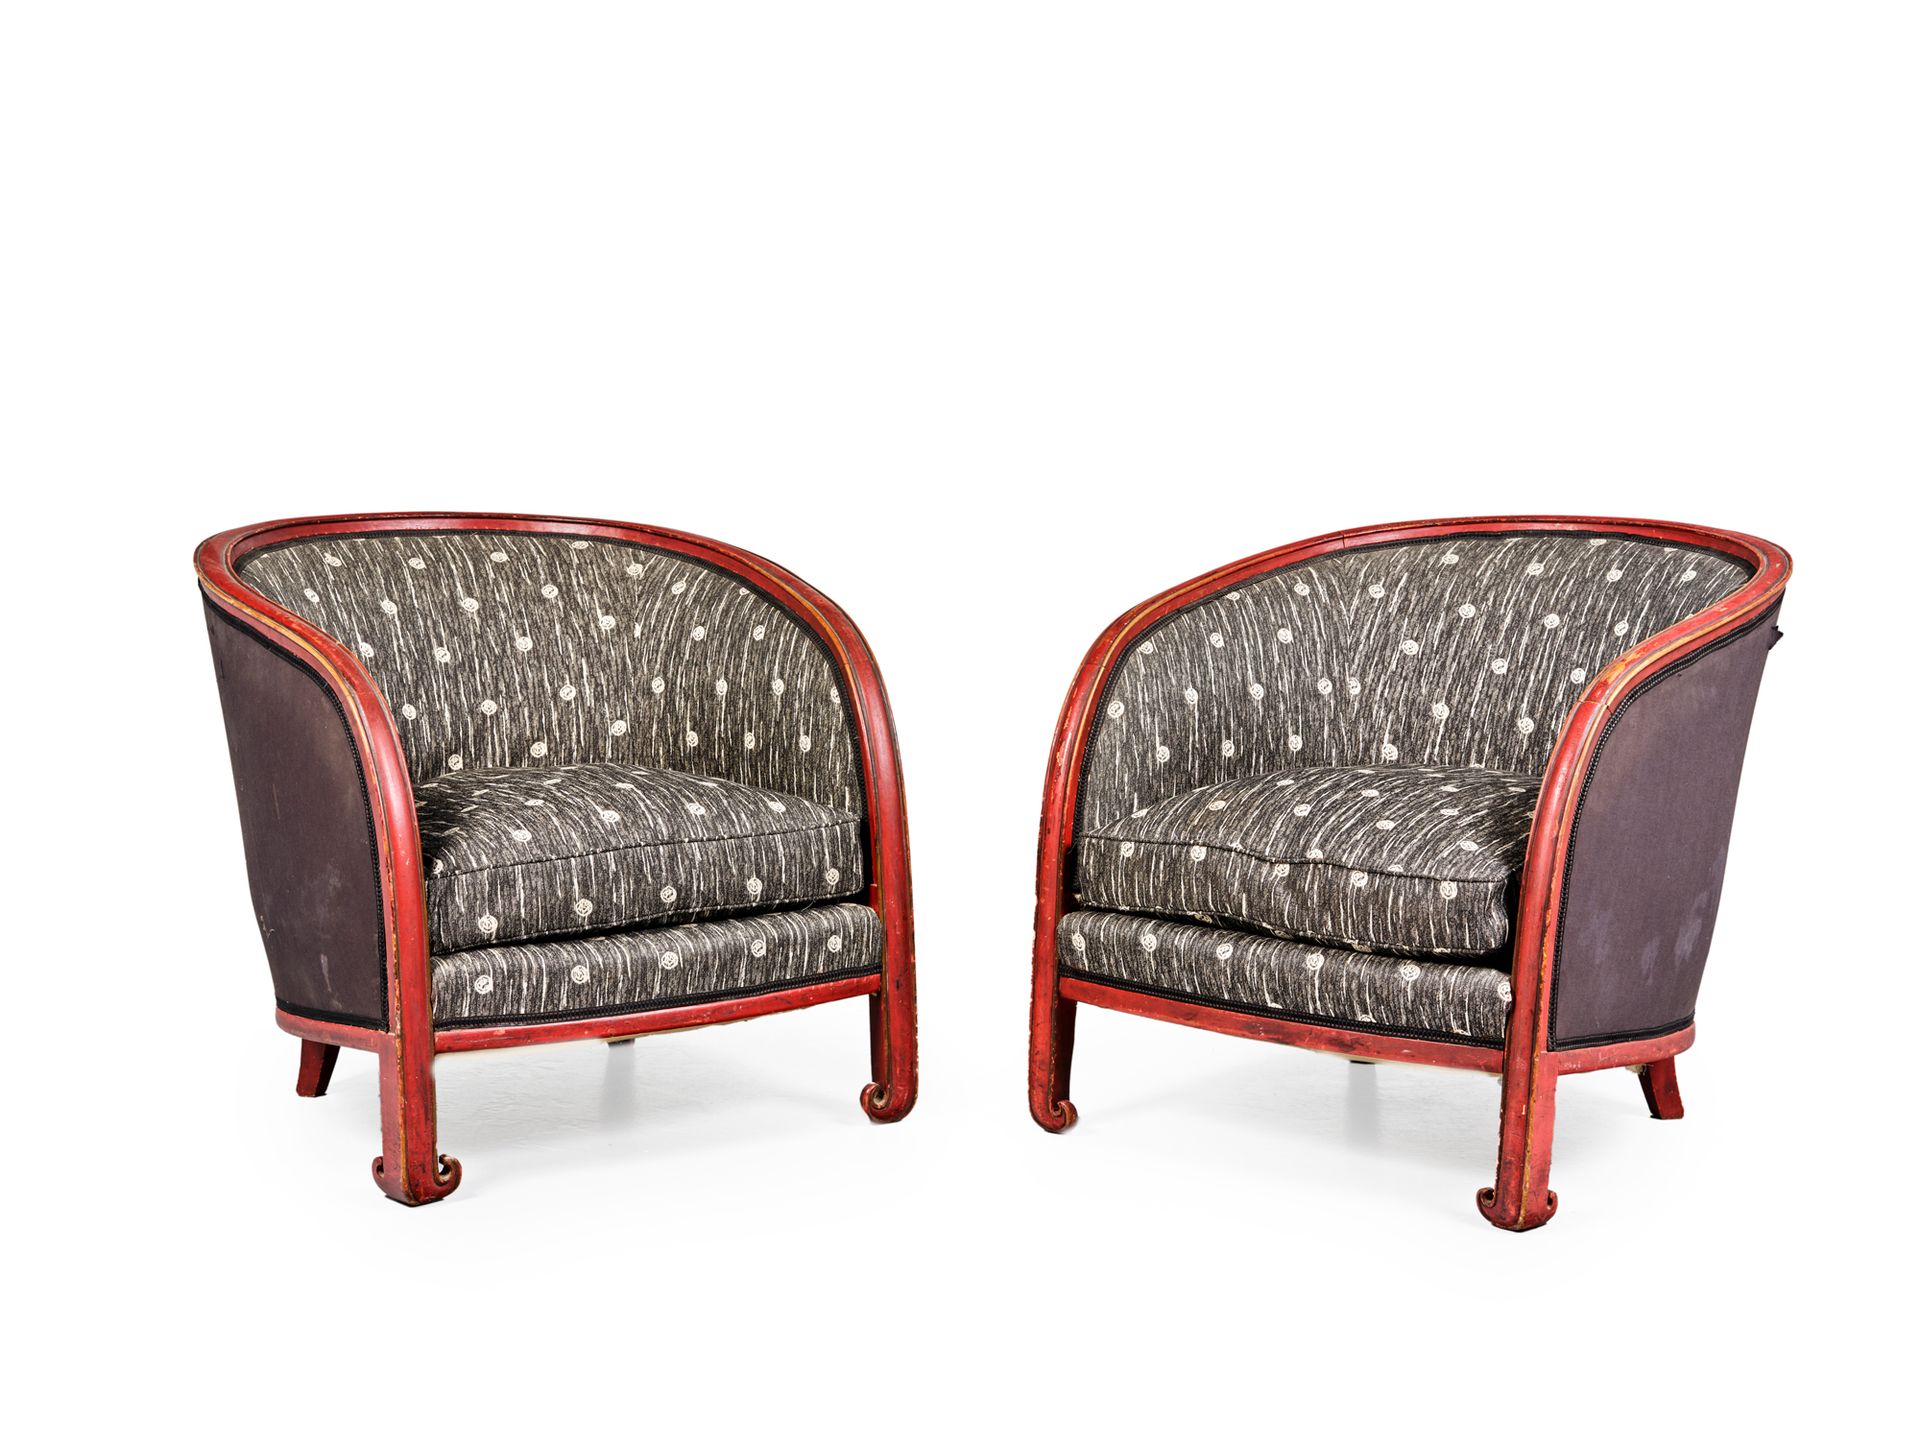 Atelier MARTINE Paul POIRET, attribué à Pair of red lacquered wood armchairs wit&hellip;